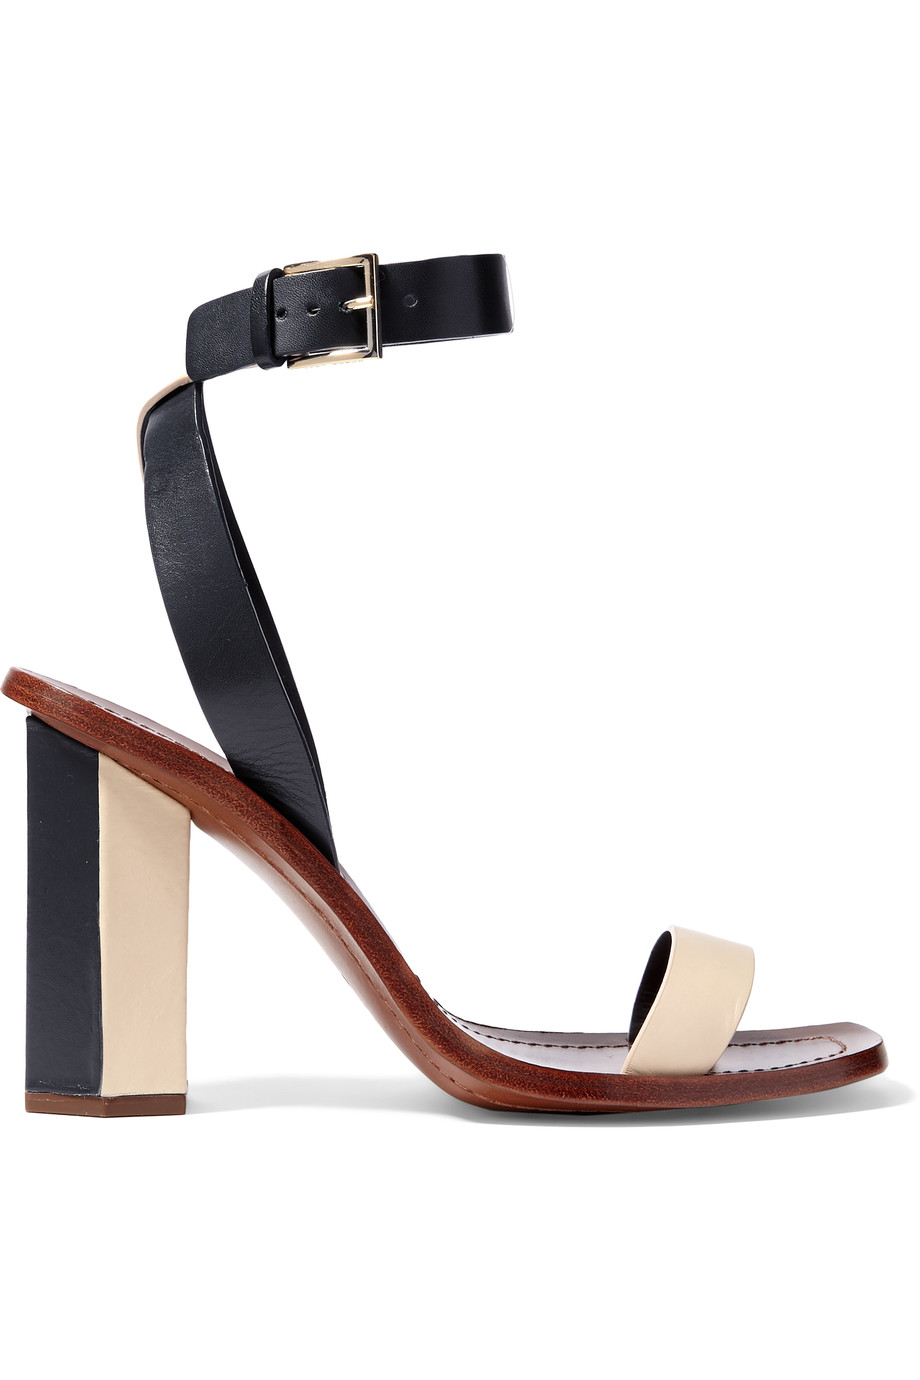 TORY BURCH Bleecker Two-Tone Leather Sandals | ModeSens